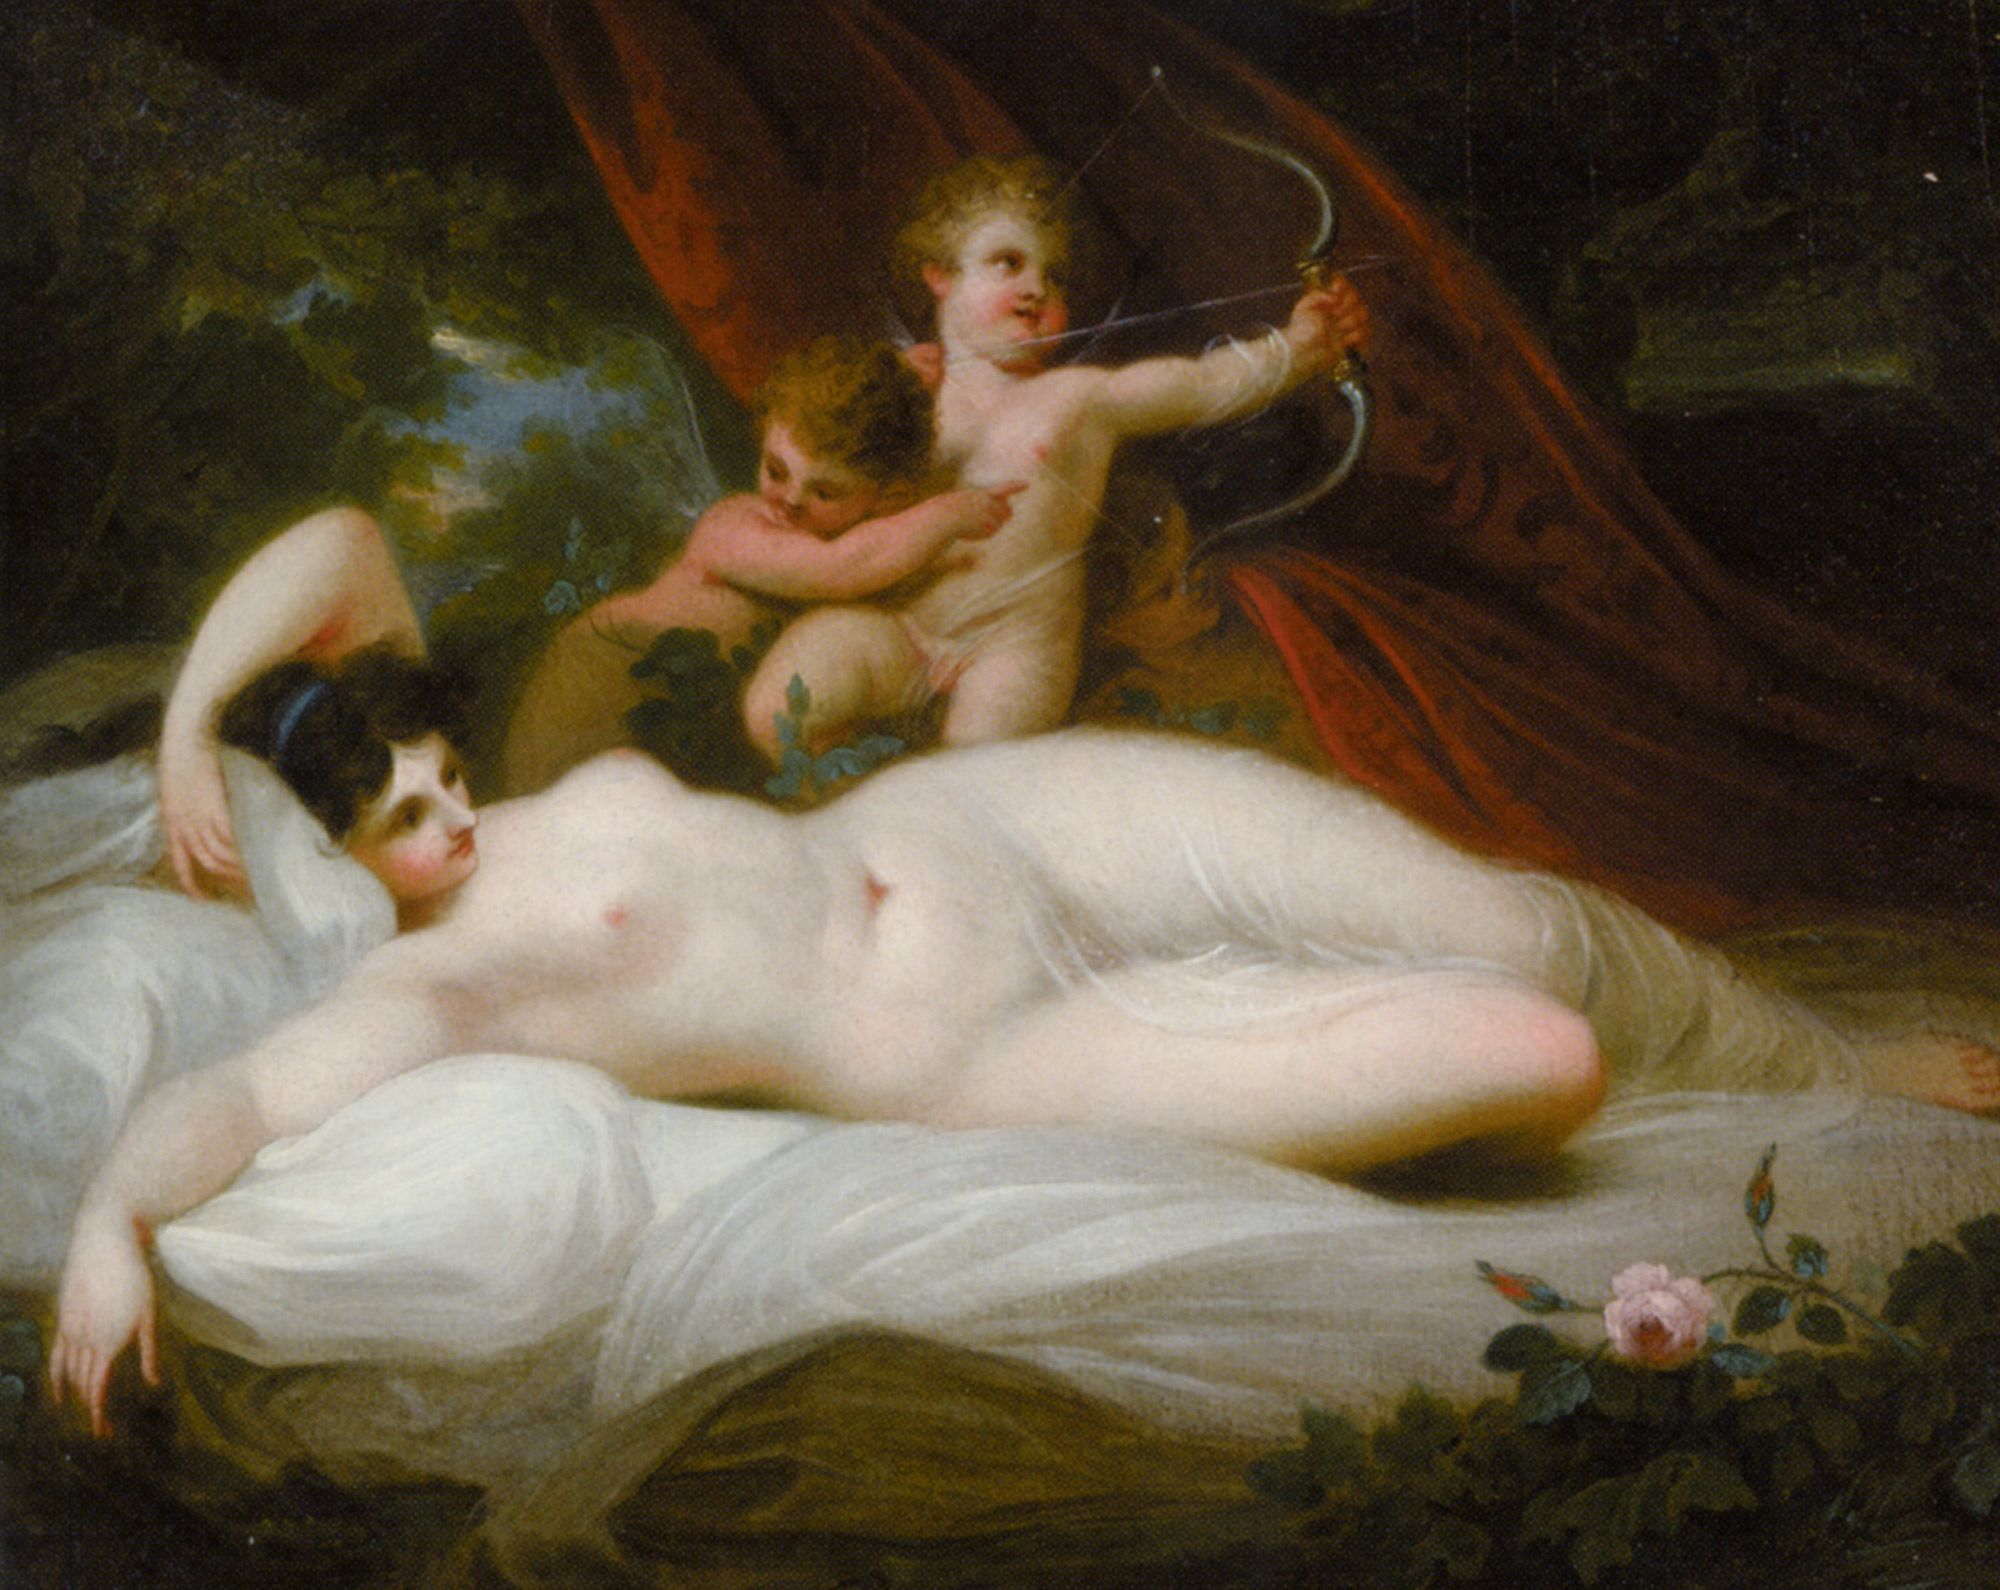 The Power of Venus by Richard Westall